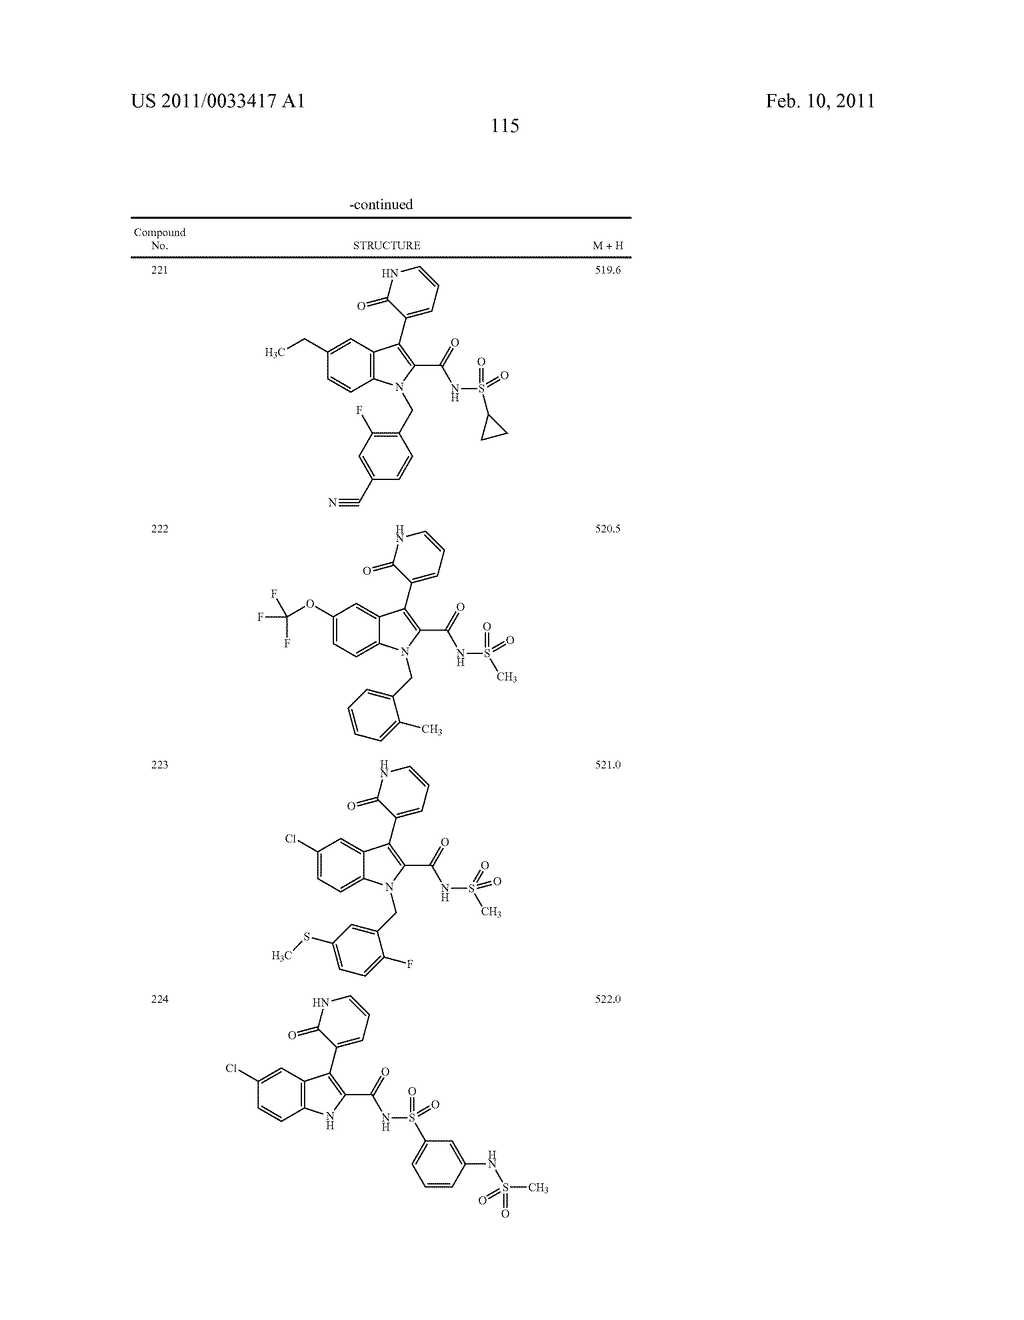 2,3-SUBSTITUTED INDOLE DERIVATIVES FOR TREATING VIRAL INFECTIONS - diagram, schematic, and image 116